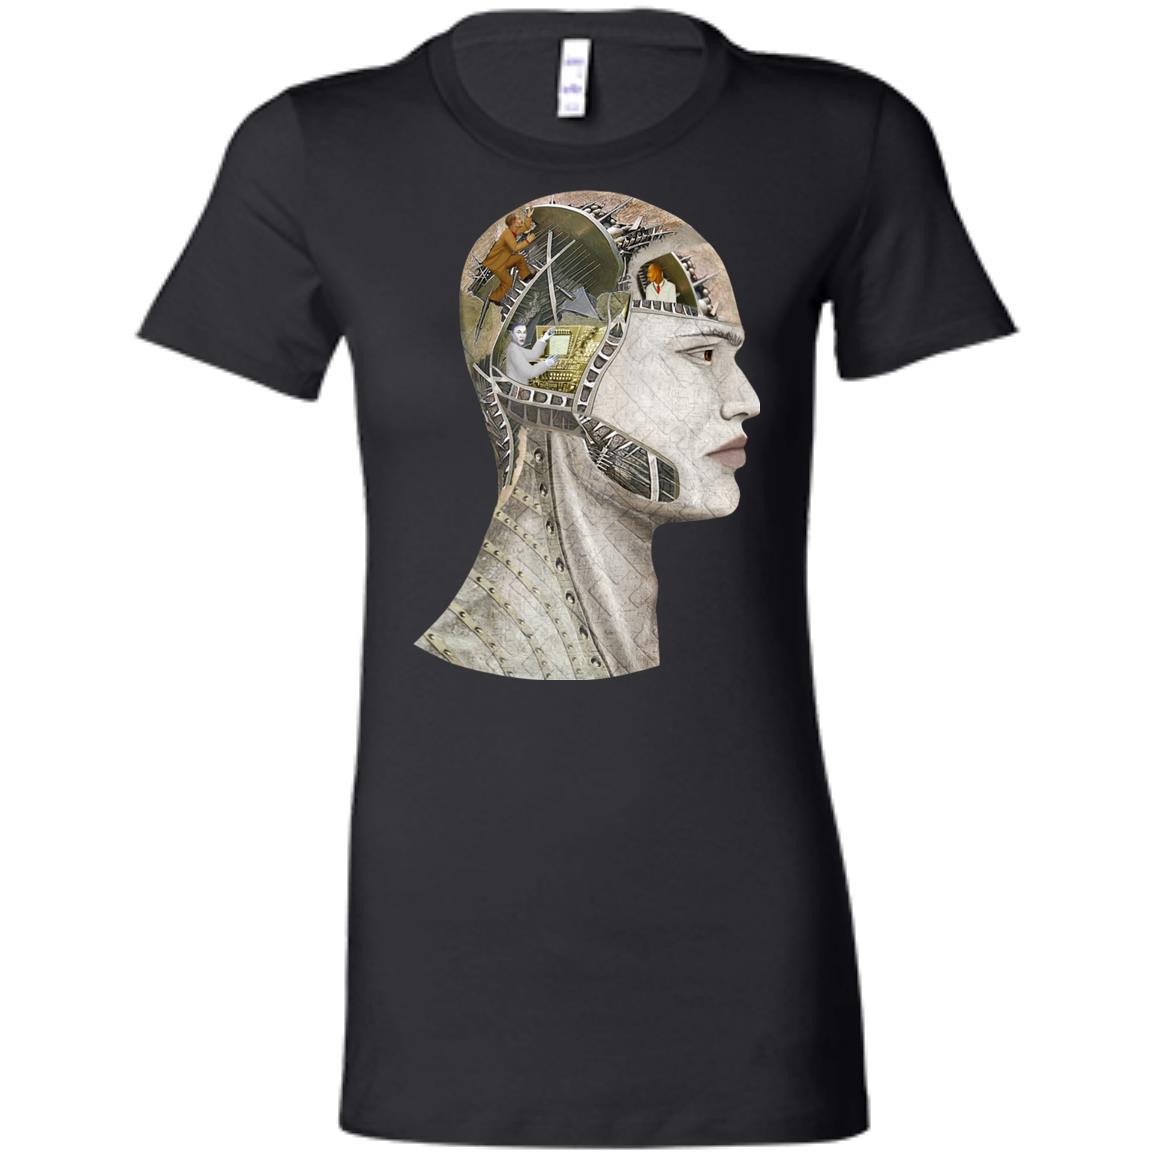 Who's Driving - Women's Fitted T-Shirt